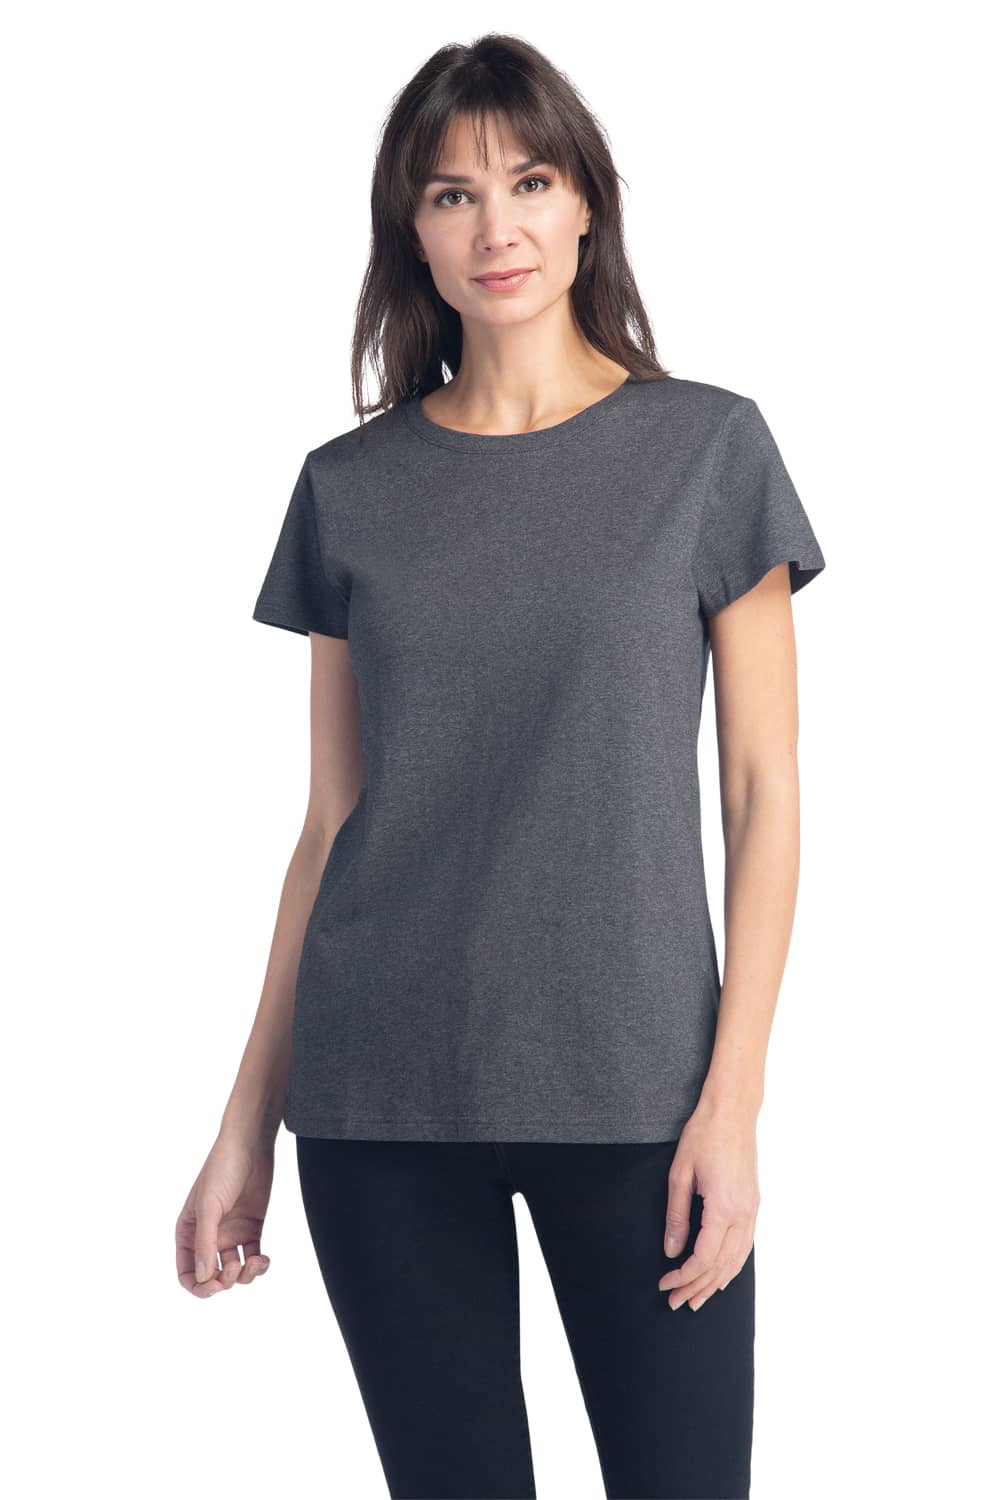 Women's Classic Fit EcoFabric™ Crew Neck Tee Womens>Casual>Top Fishers Finery Heather Gray X-Small 